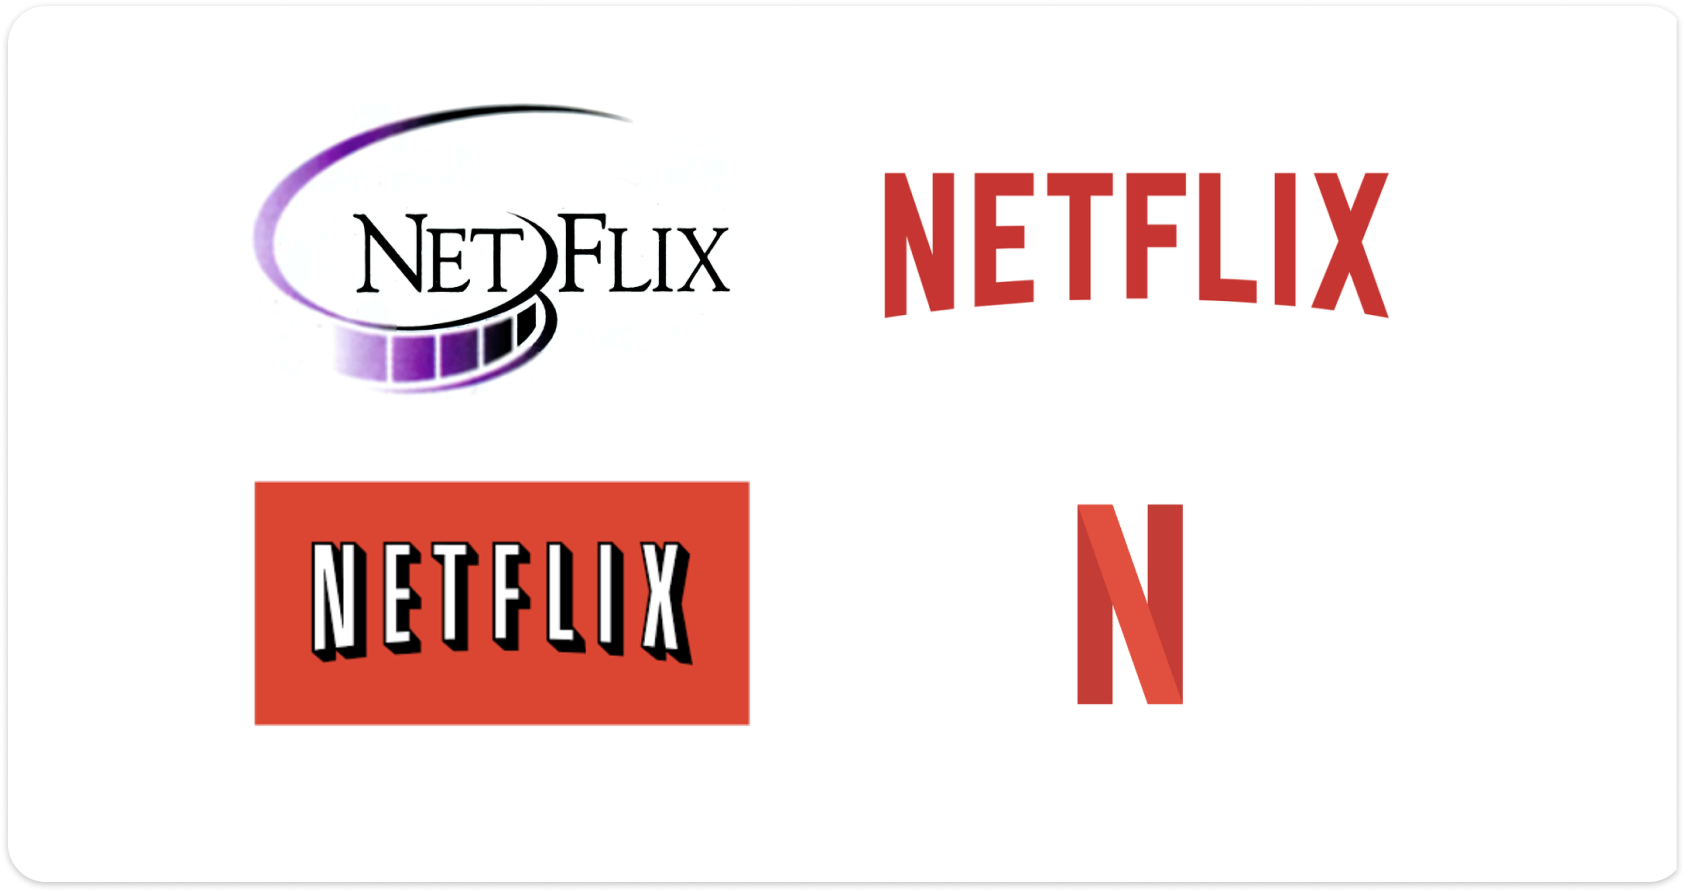 Evolve your brand book - Netflix example